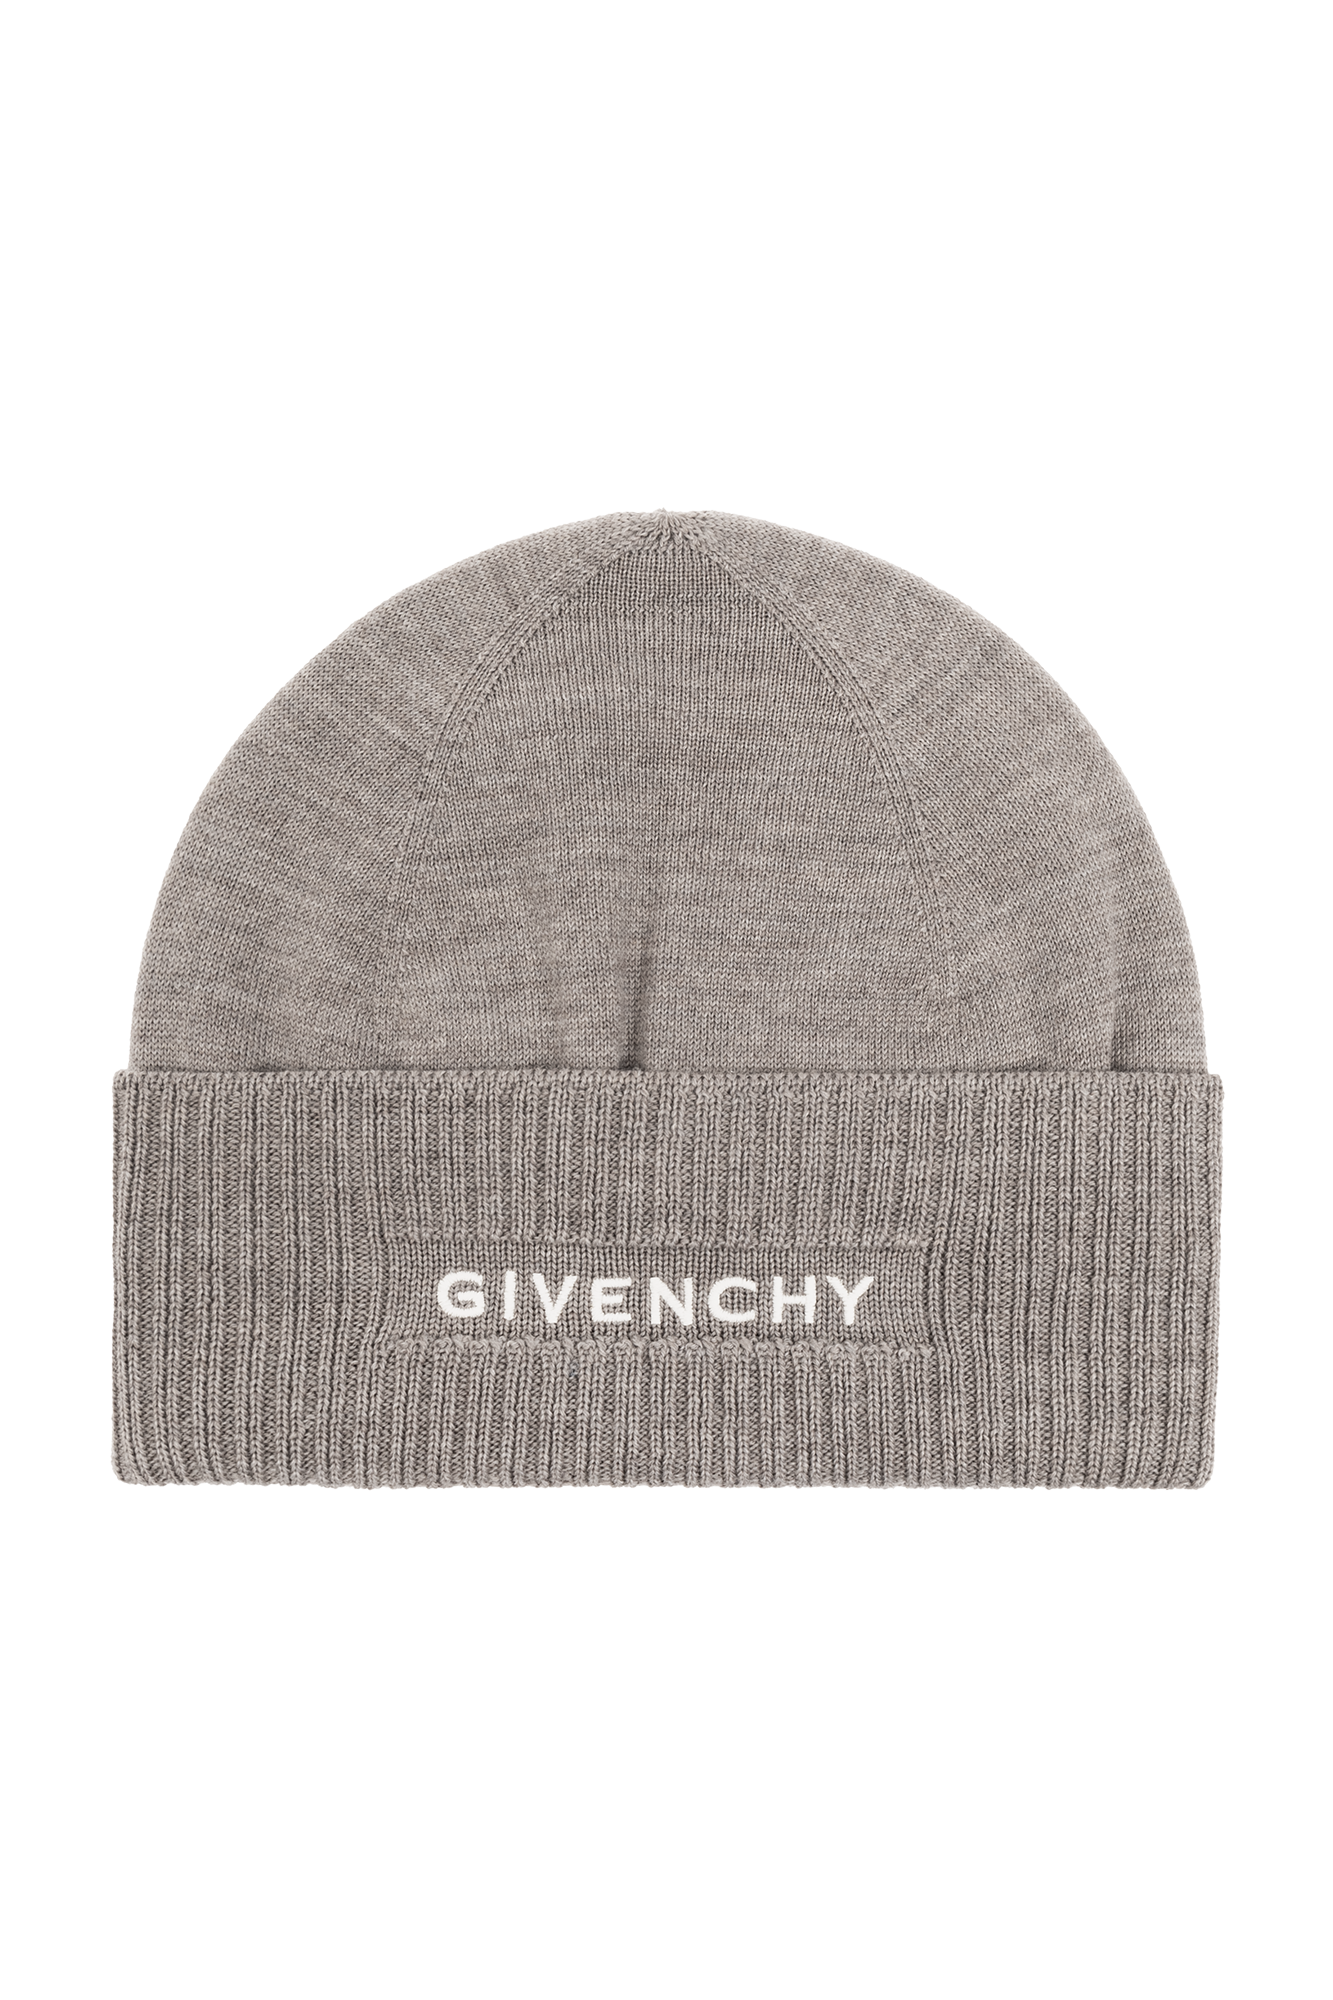 GIVENCHY Givenchy Tape Logo Knitted Sweatshirt - Clothing from